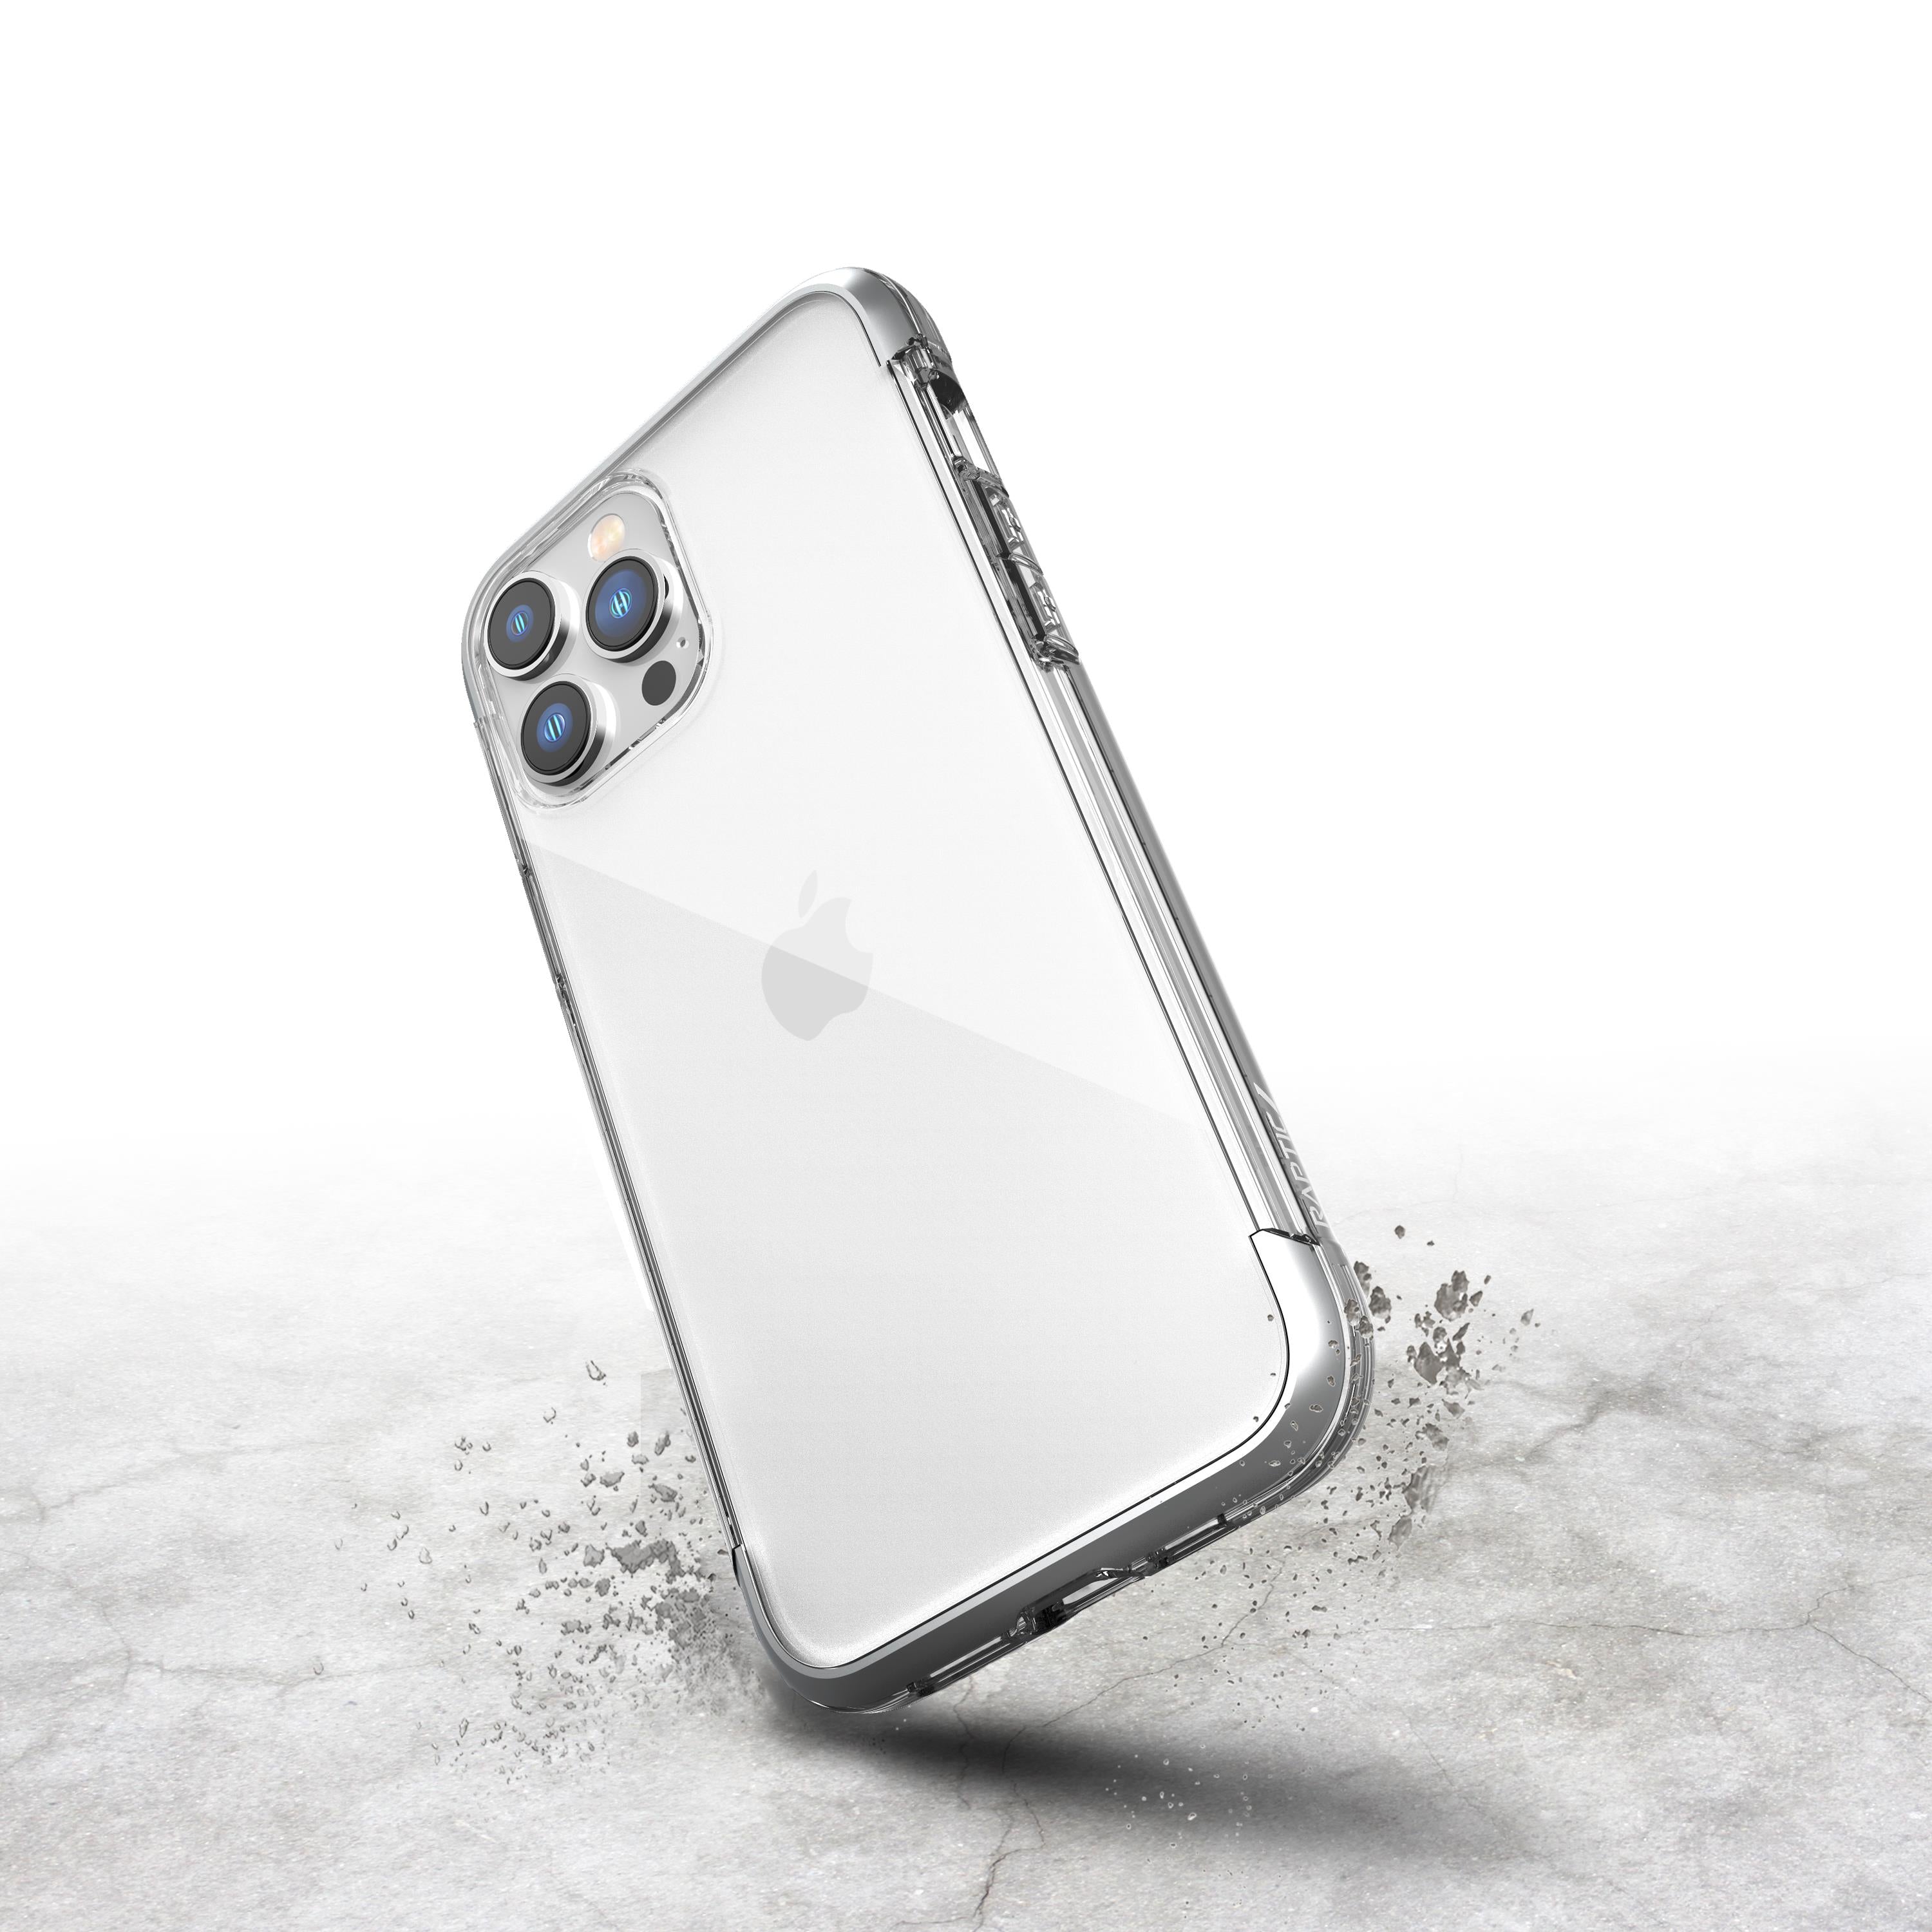 A sturdy metal iPhone 14 Pro protective case, the Raptic Air, on a concrete surface.